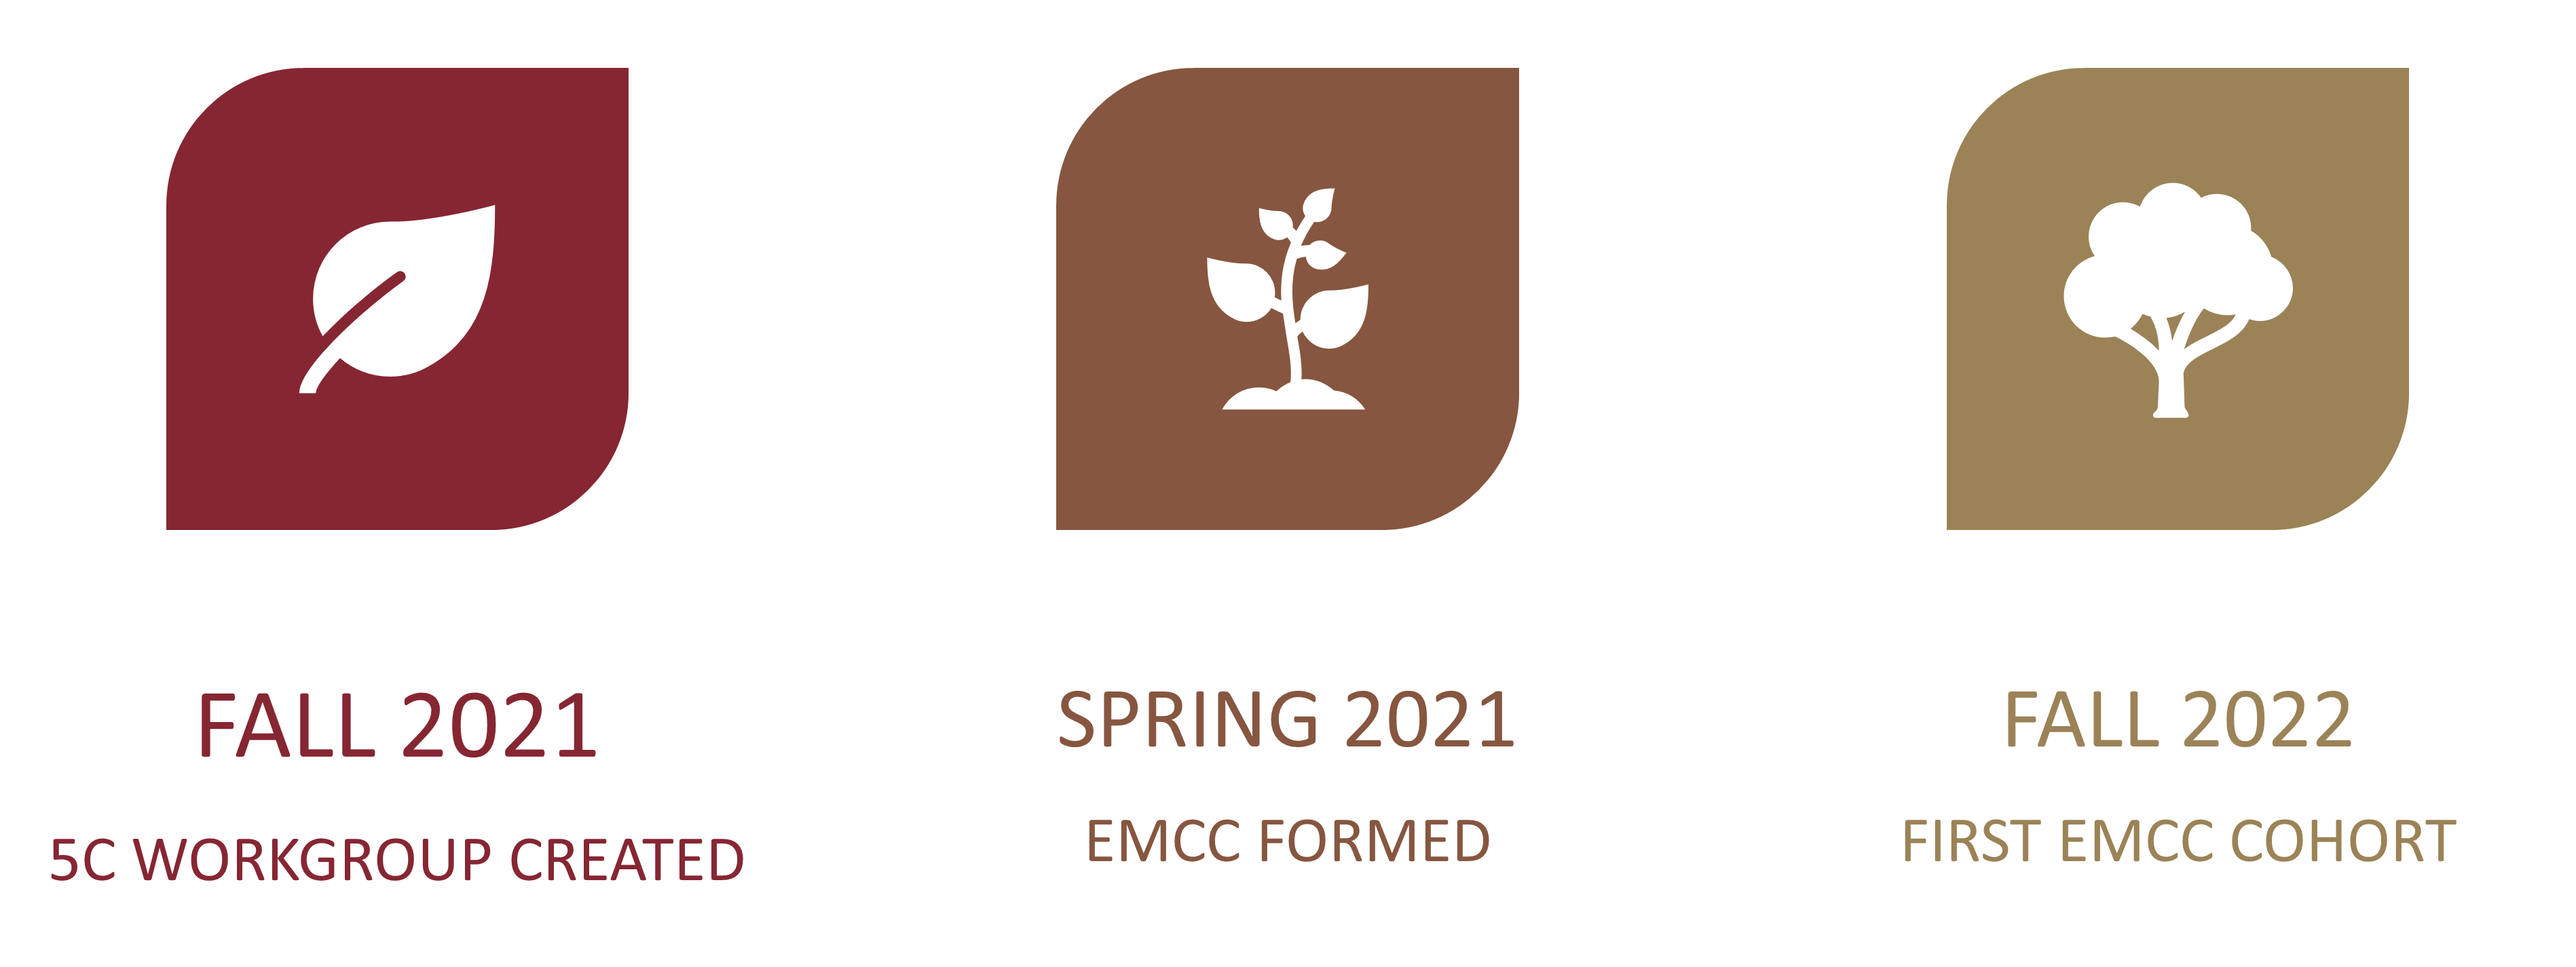 EMCC Timeline: Fall 2021 5C Workgroup Created, Spring 2021 EMCC Formed, Fall 2022 First EMCC Cohort